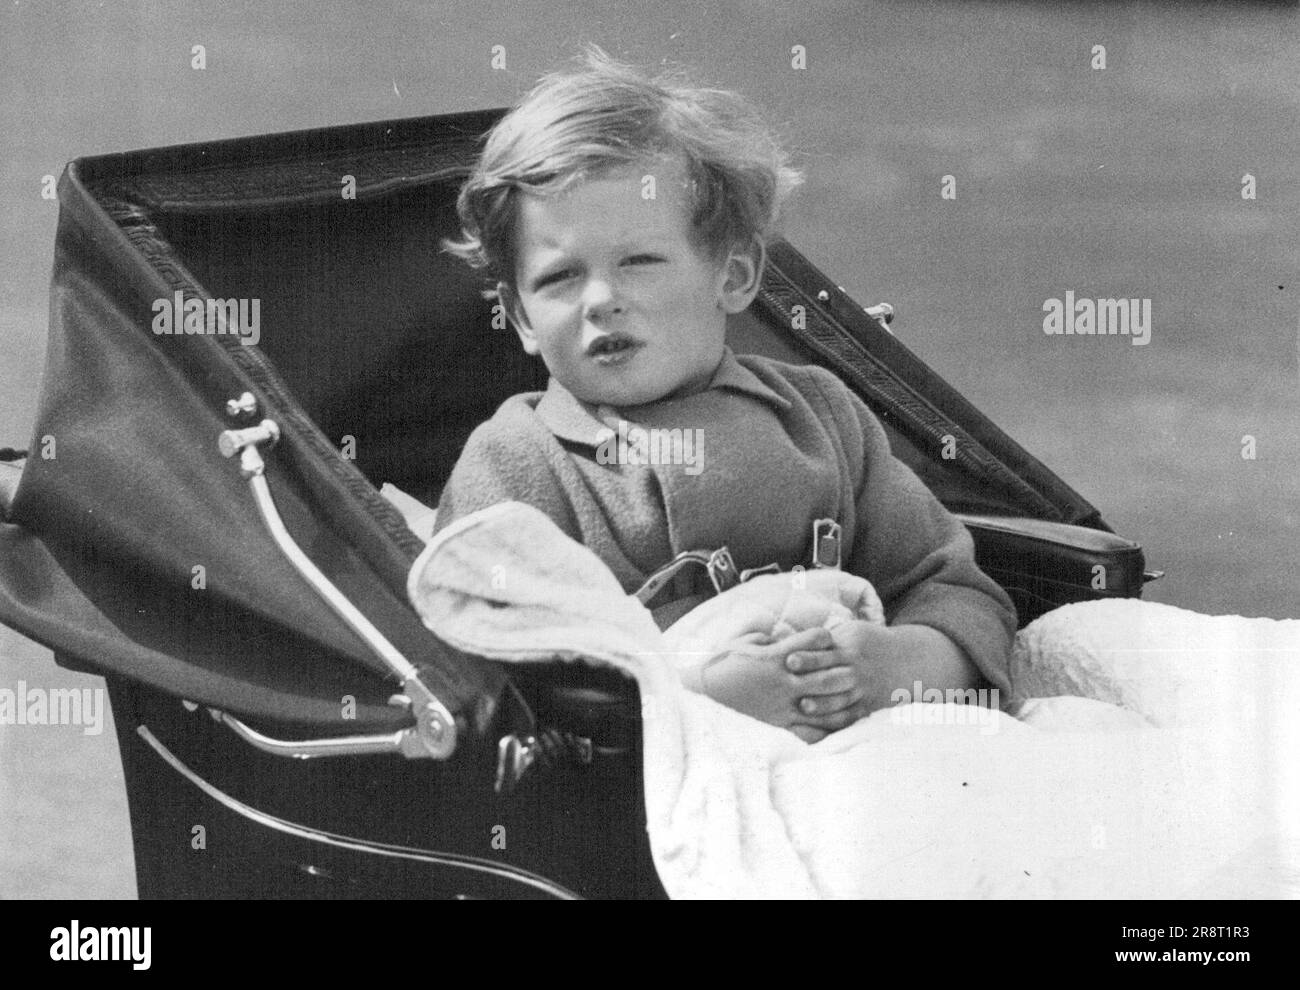 Prince Edward's Outing in Belgrave Square London - Prince Edward, son of the Duke and Duchess of Kent, out in Belgrave Square, this morning. May 21, 1938. (Photo by Sport & General Press Agency, Limited). Stock Photo